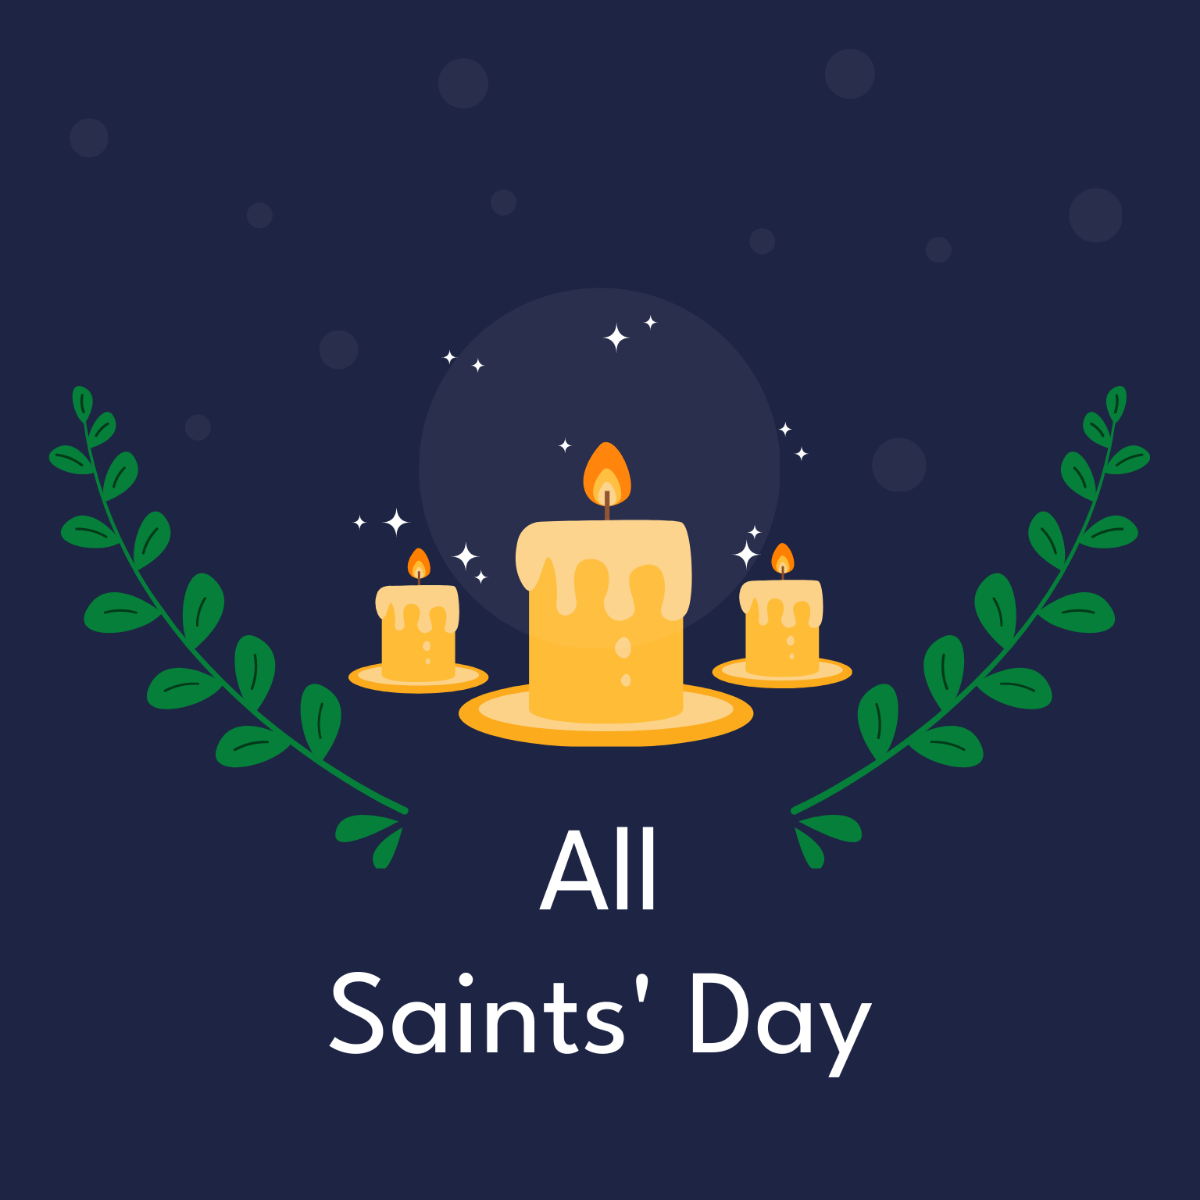 All Saints' Day Celebration Vector Template